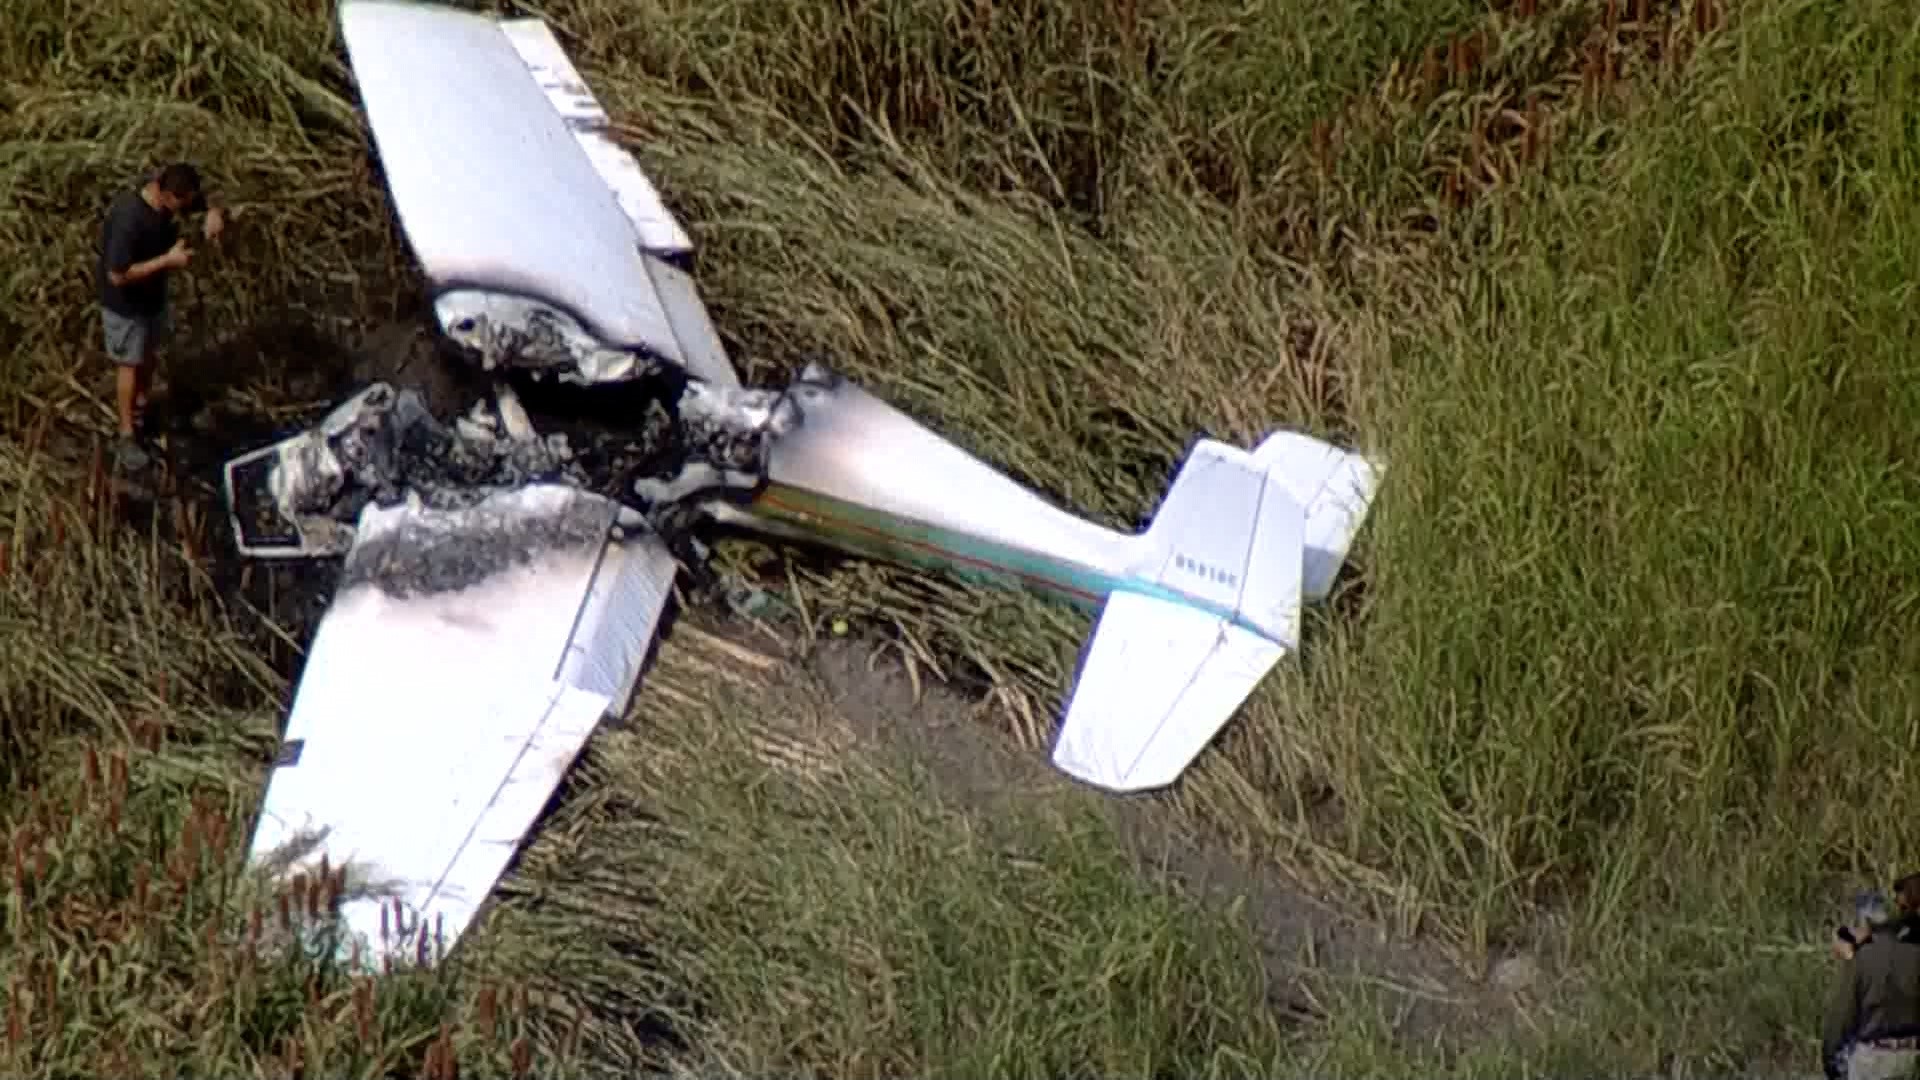 The pilot crashed at the Caddo Mills Airport off FM 1565.